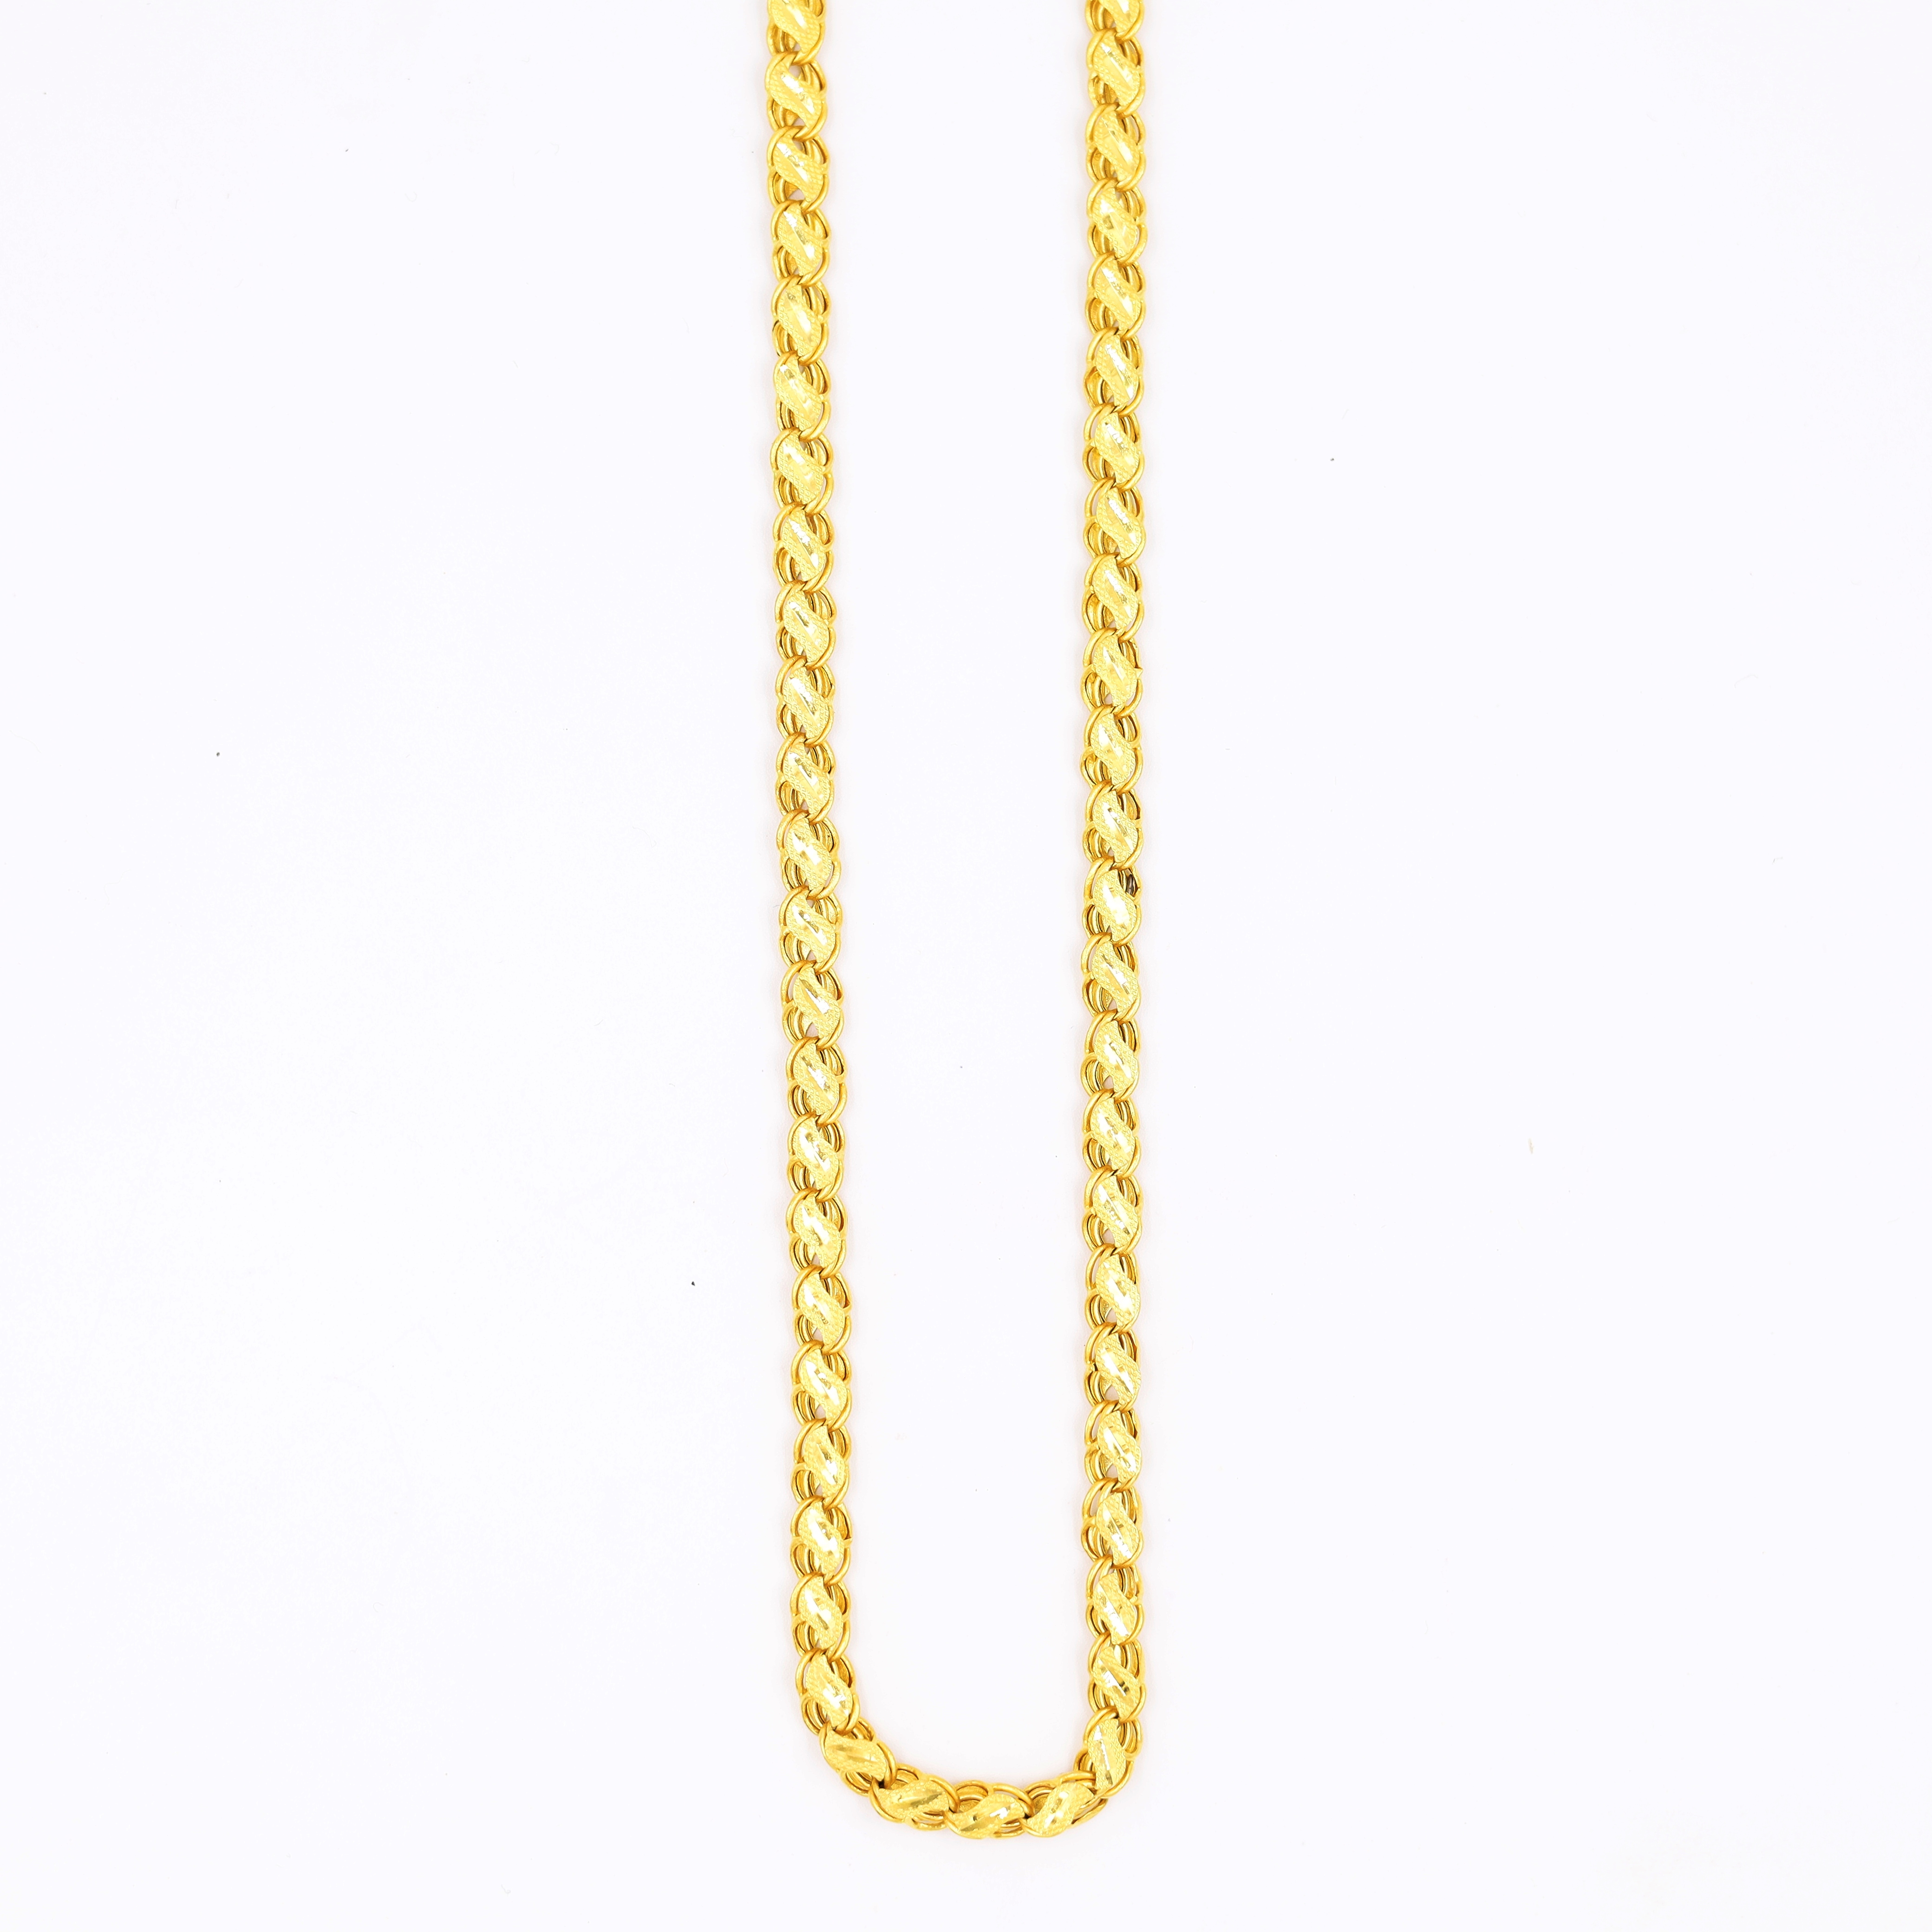 Spiral Pattern Dual Tone Gold Chain For Men